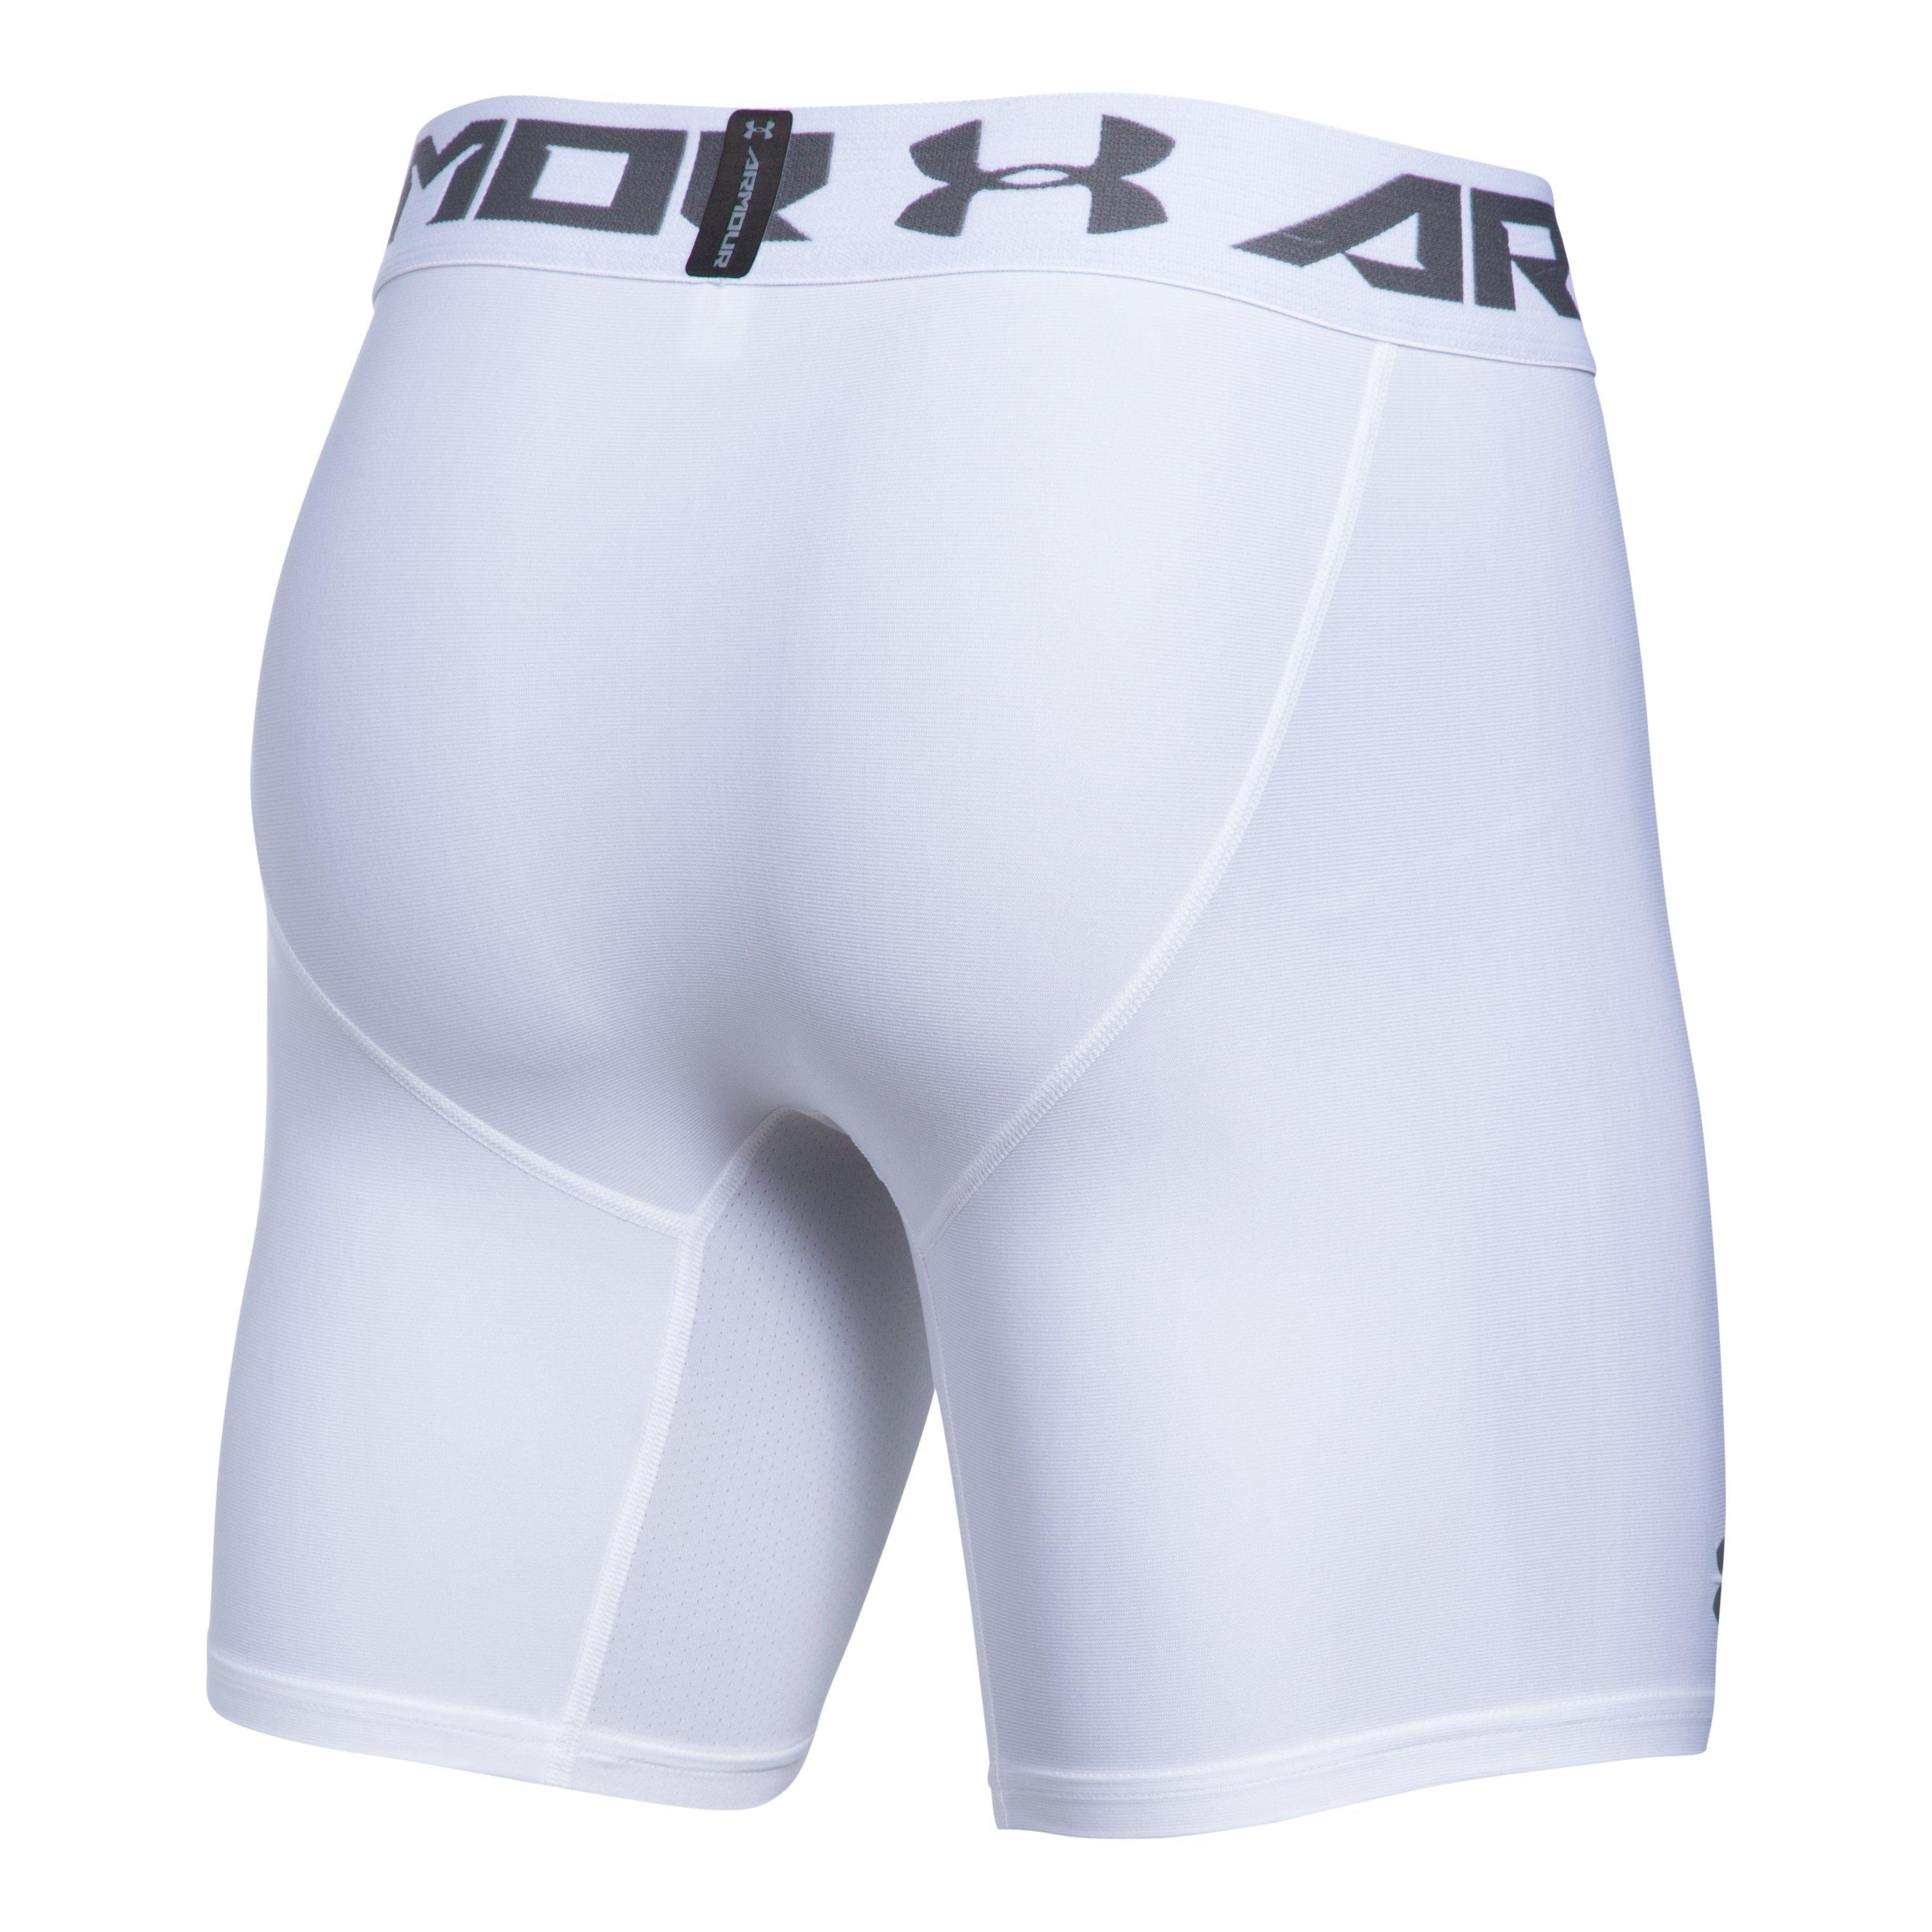 CARGFM Compression Shorts for Men Underwear Performance Shorts